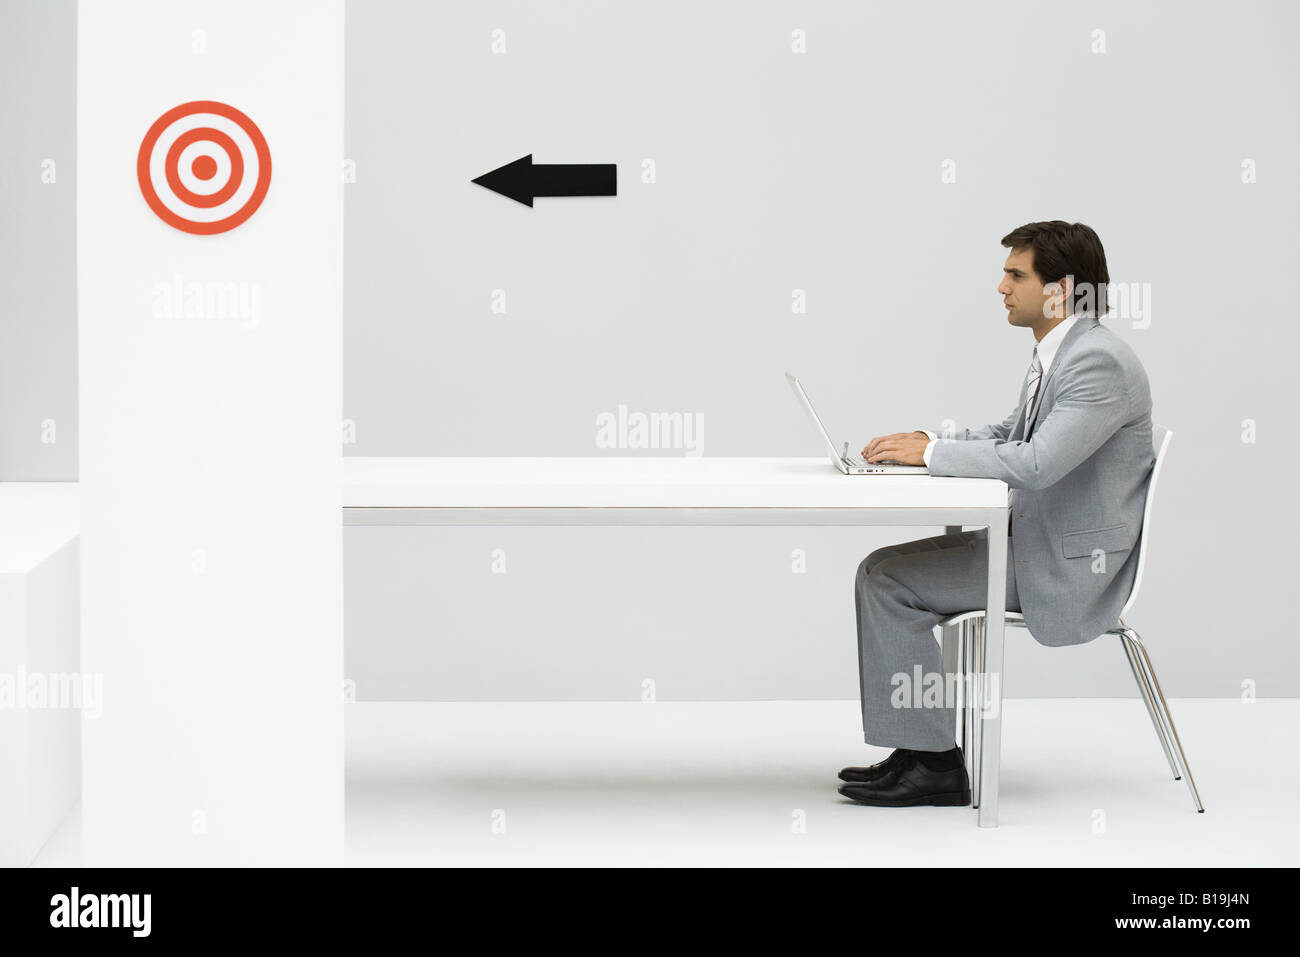 Man sitting at desk, using laptop computer, arrow on wall pointing at bull's-eye Stock Photo